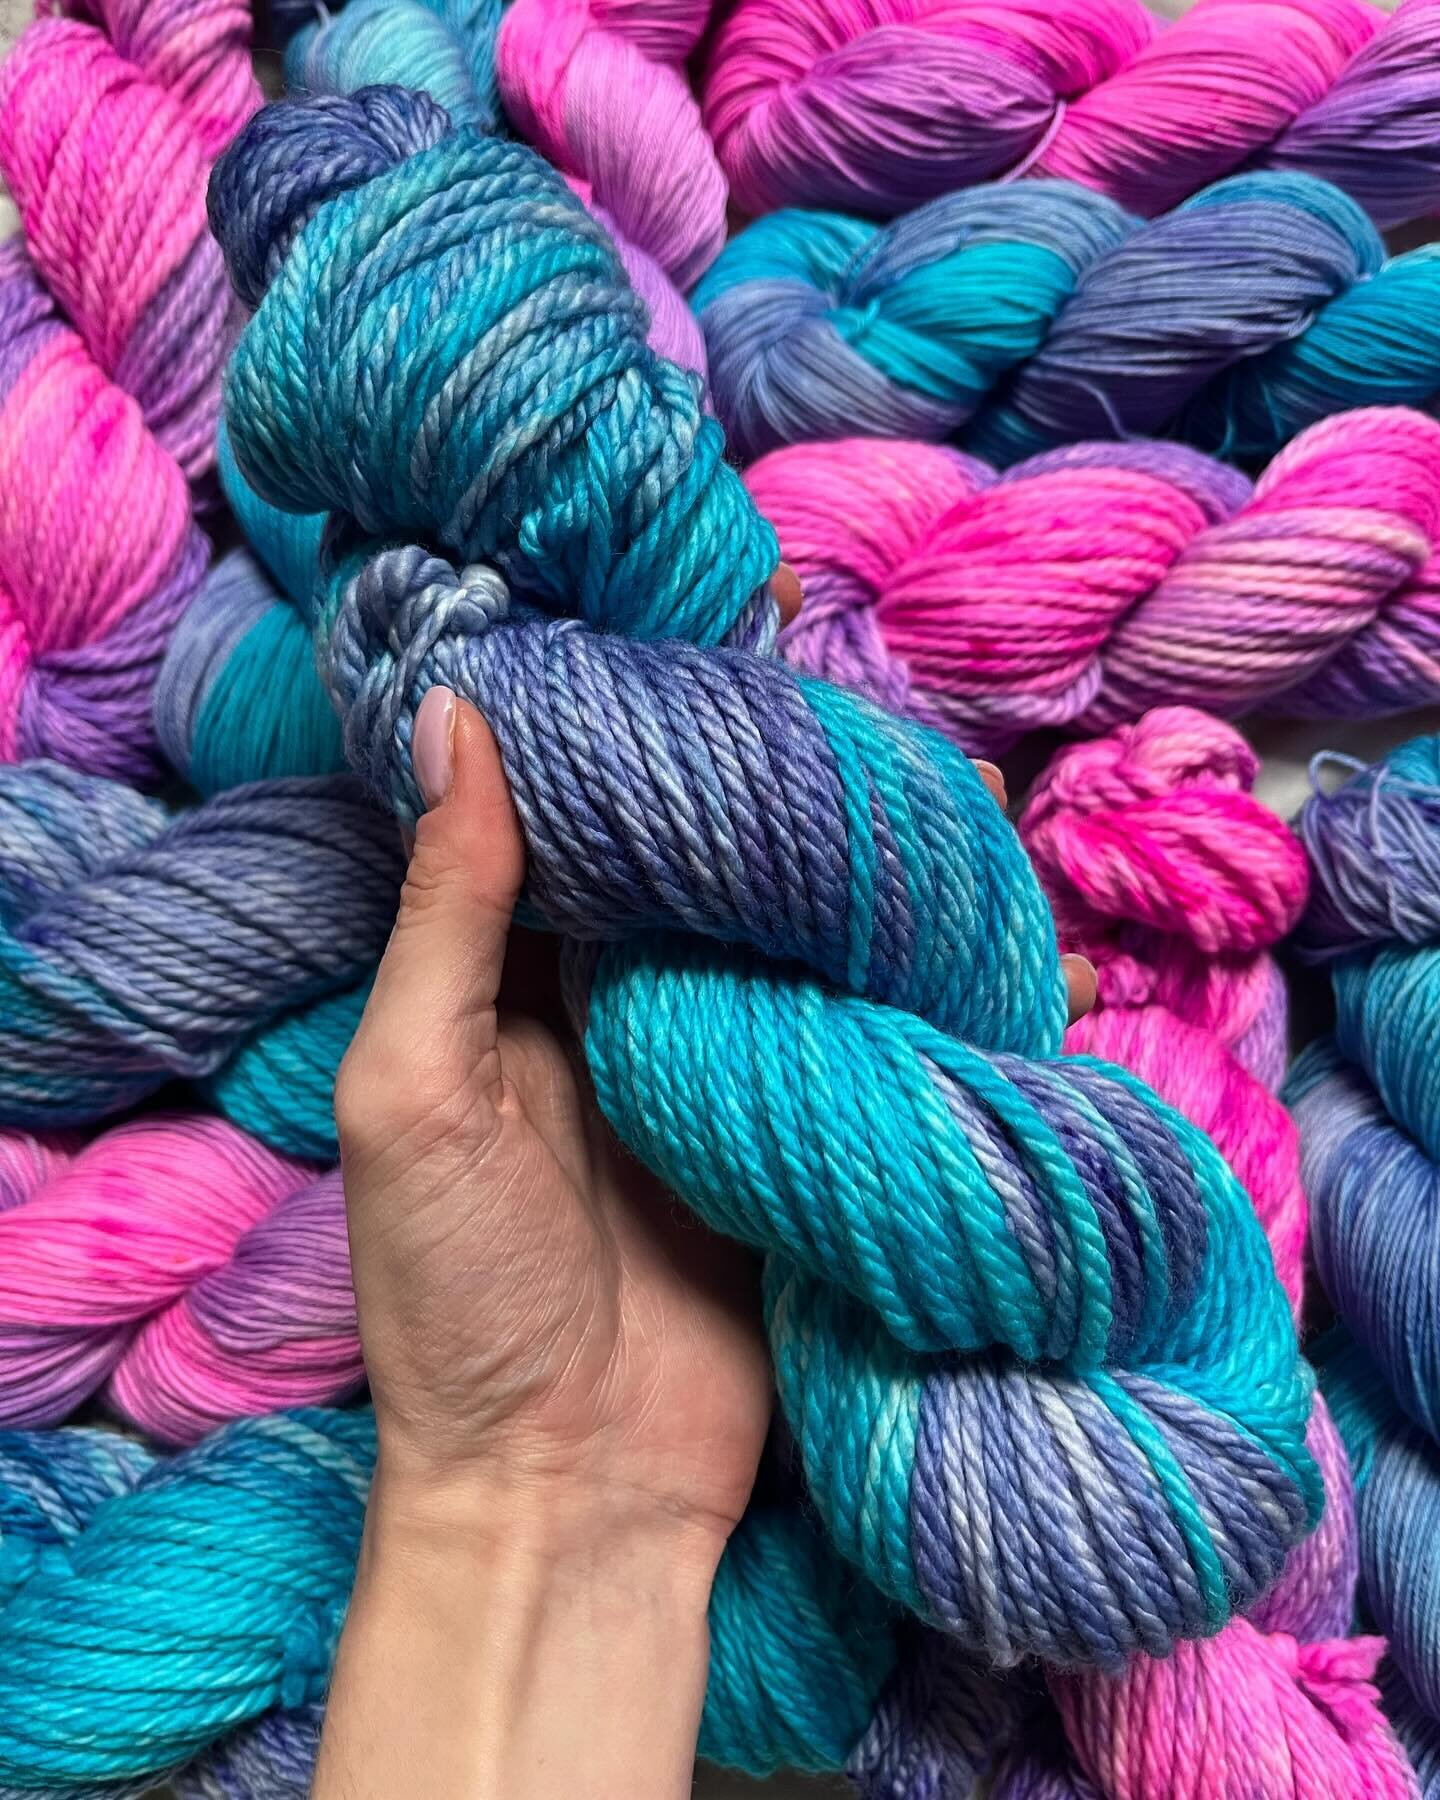 you can pre order my new spring colour ways now! introducing &ldquo;hot goss&rdquo;, a lipgloss pink with a swirl of lilac, and &ldquo;first dog in space&rdquo; a cosmic blue with starry lilac sprinkles ✨

both colour ways are available in merino soc